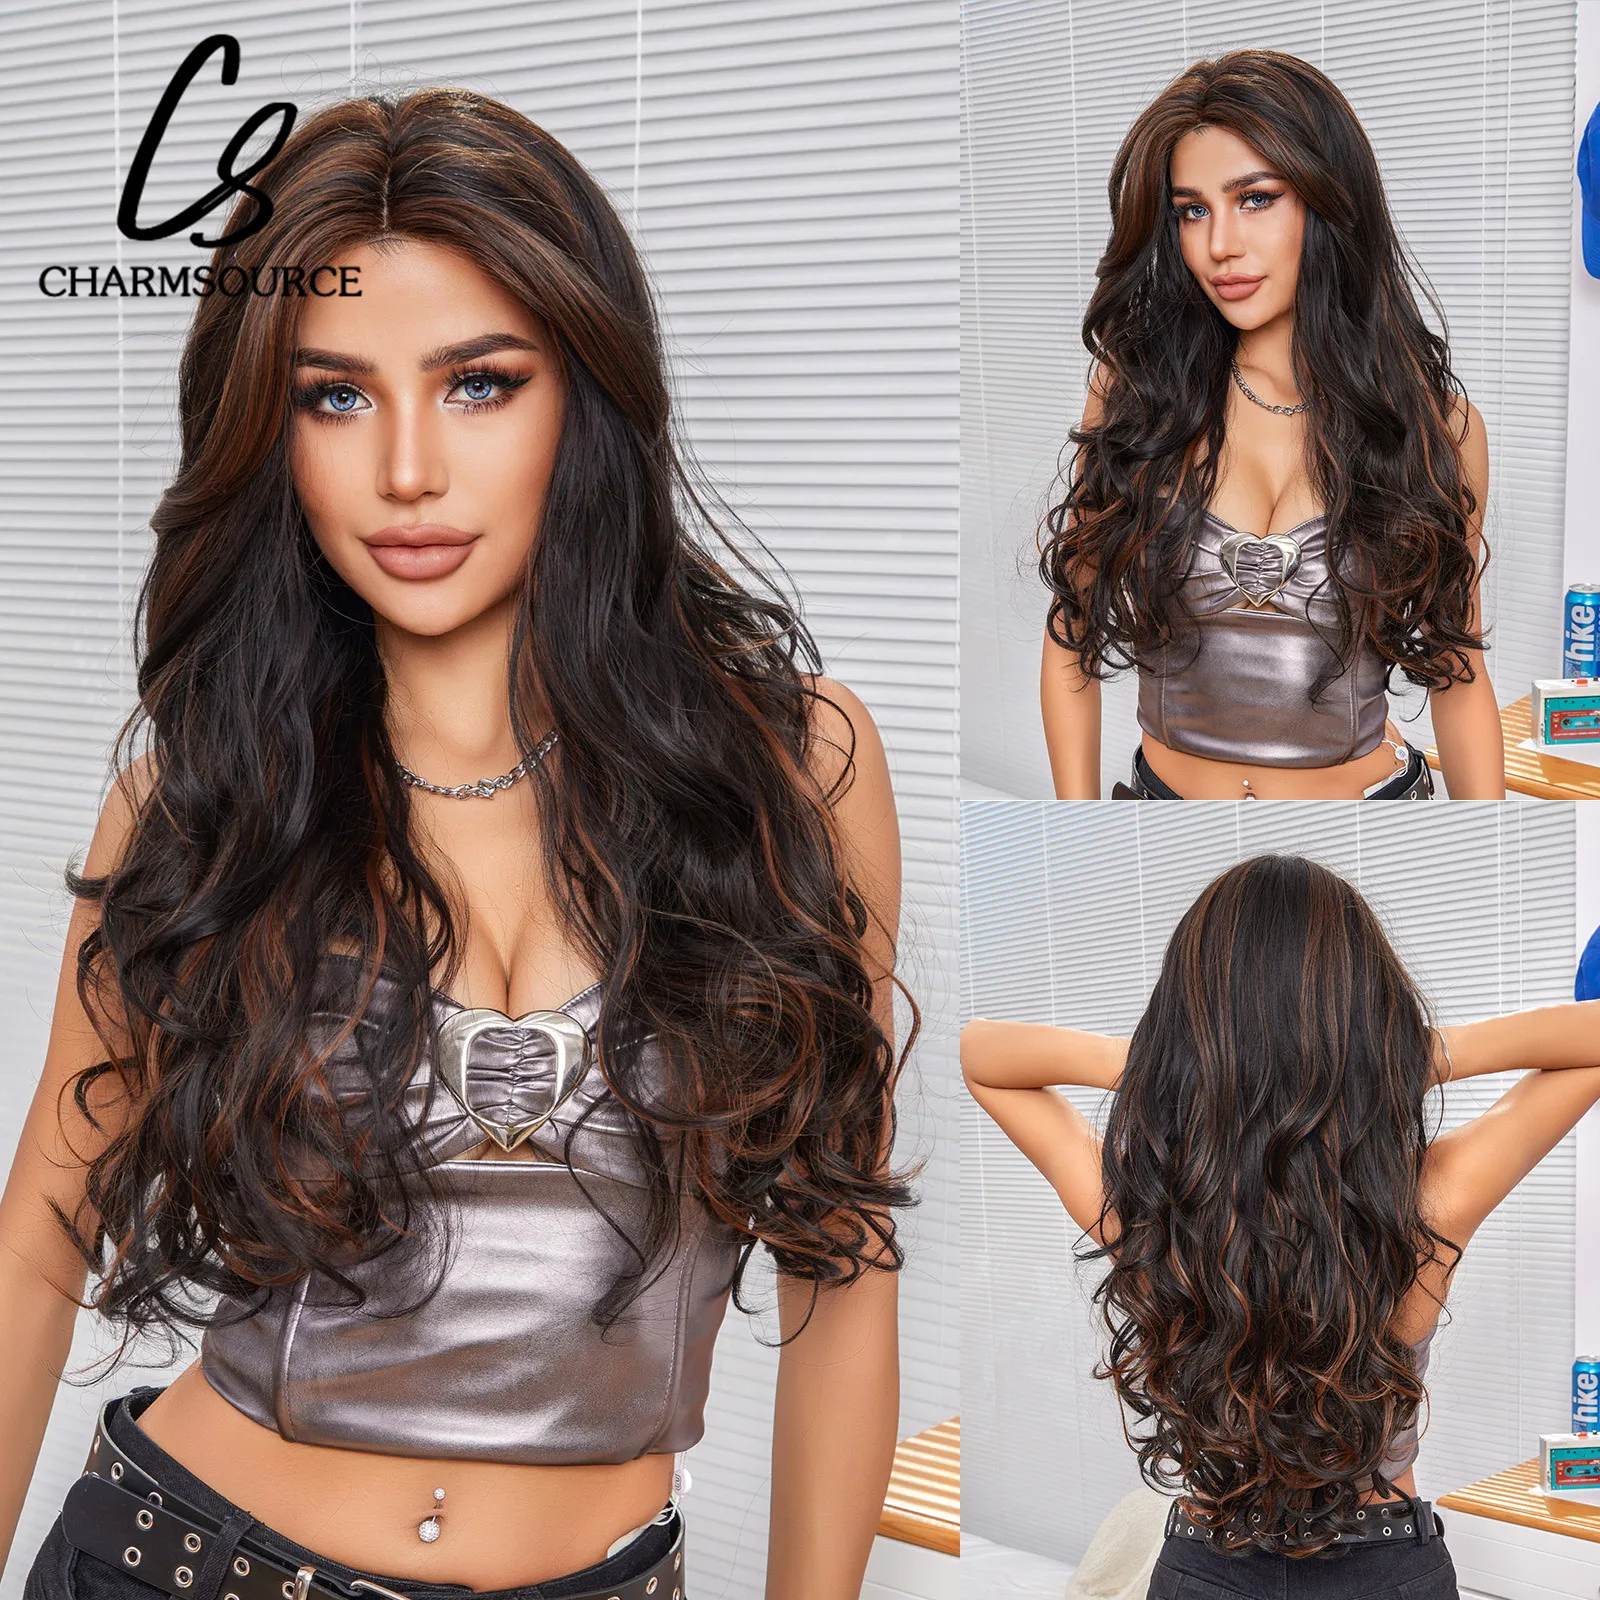 

CharmSource Brown Ombre Wig Hairline Lace Front Wigs Synthetic Hair Long Wavy Ladies Women's Cosplay Free Shipping High Density